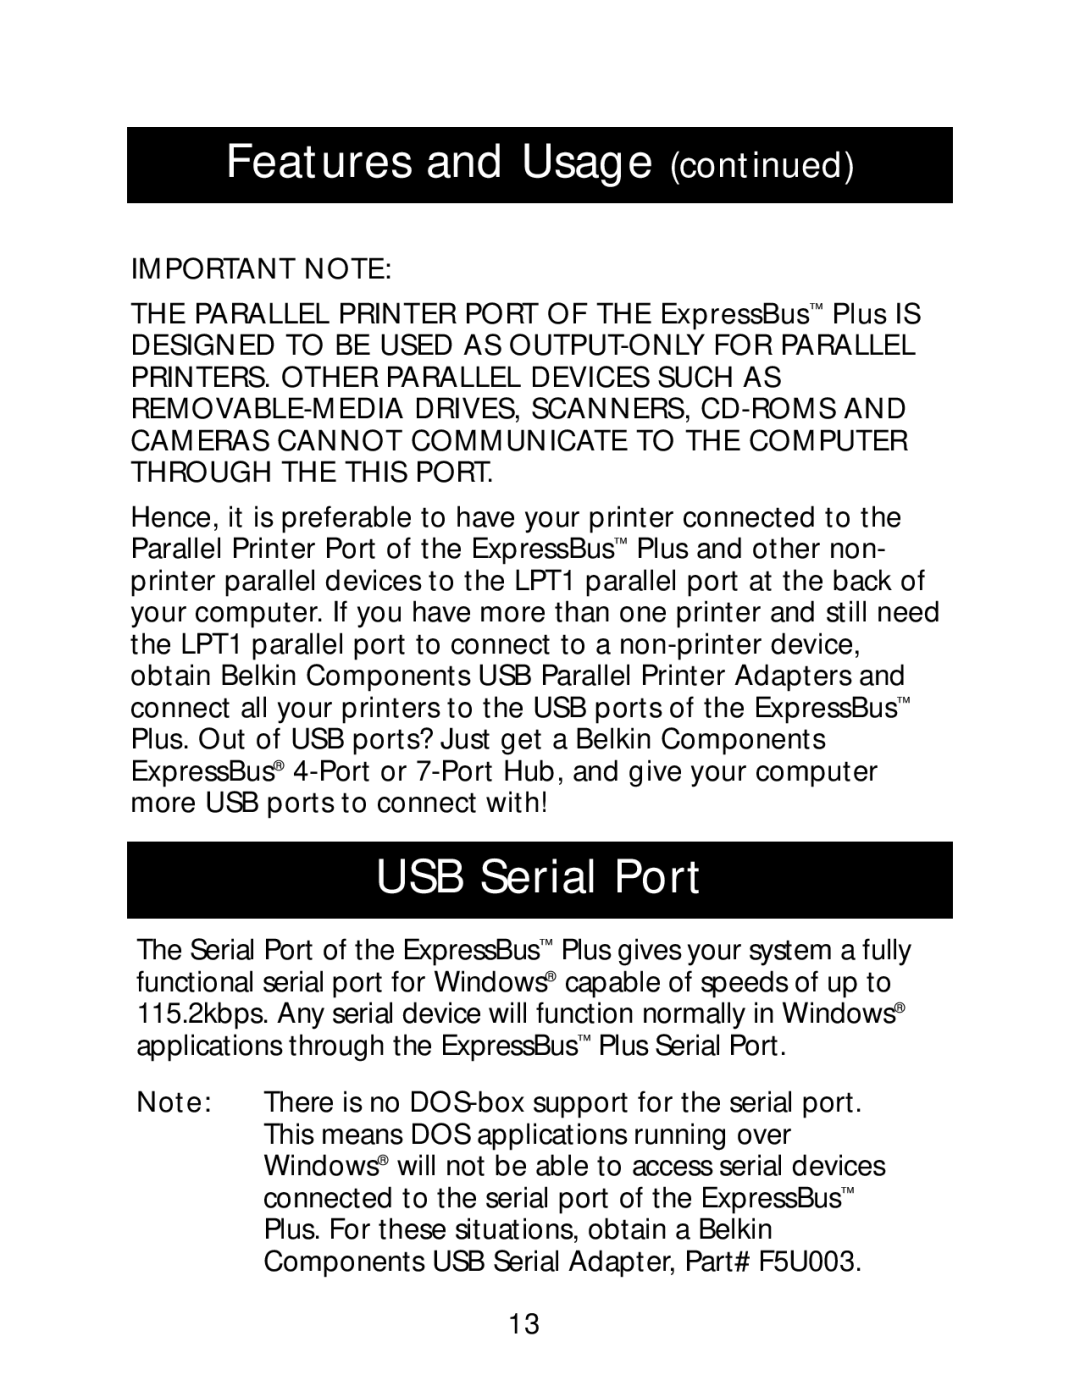 Belkin P73213-A user manual USB Serial Port, Features and Usage continued, Important Note 